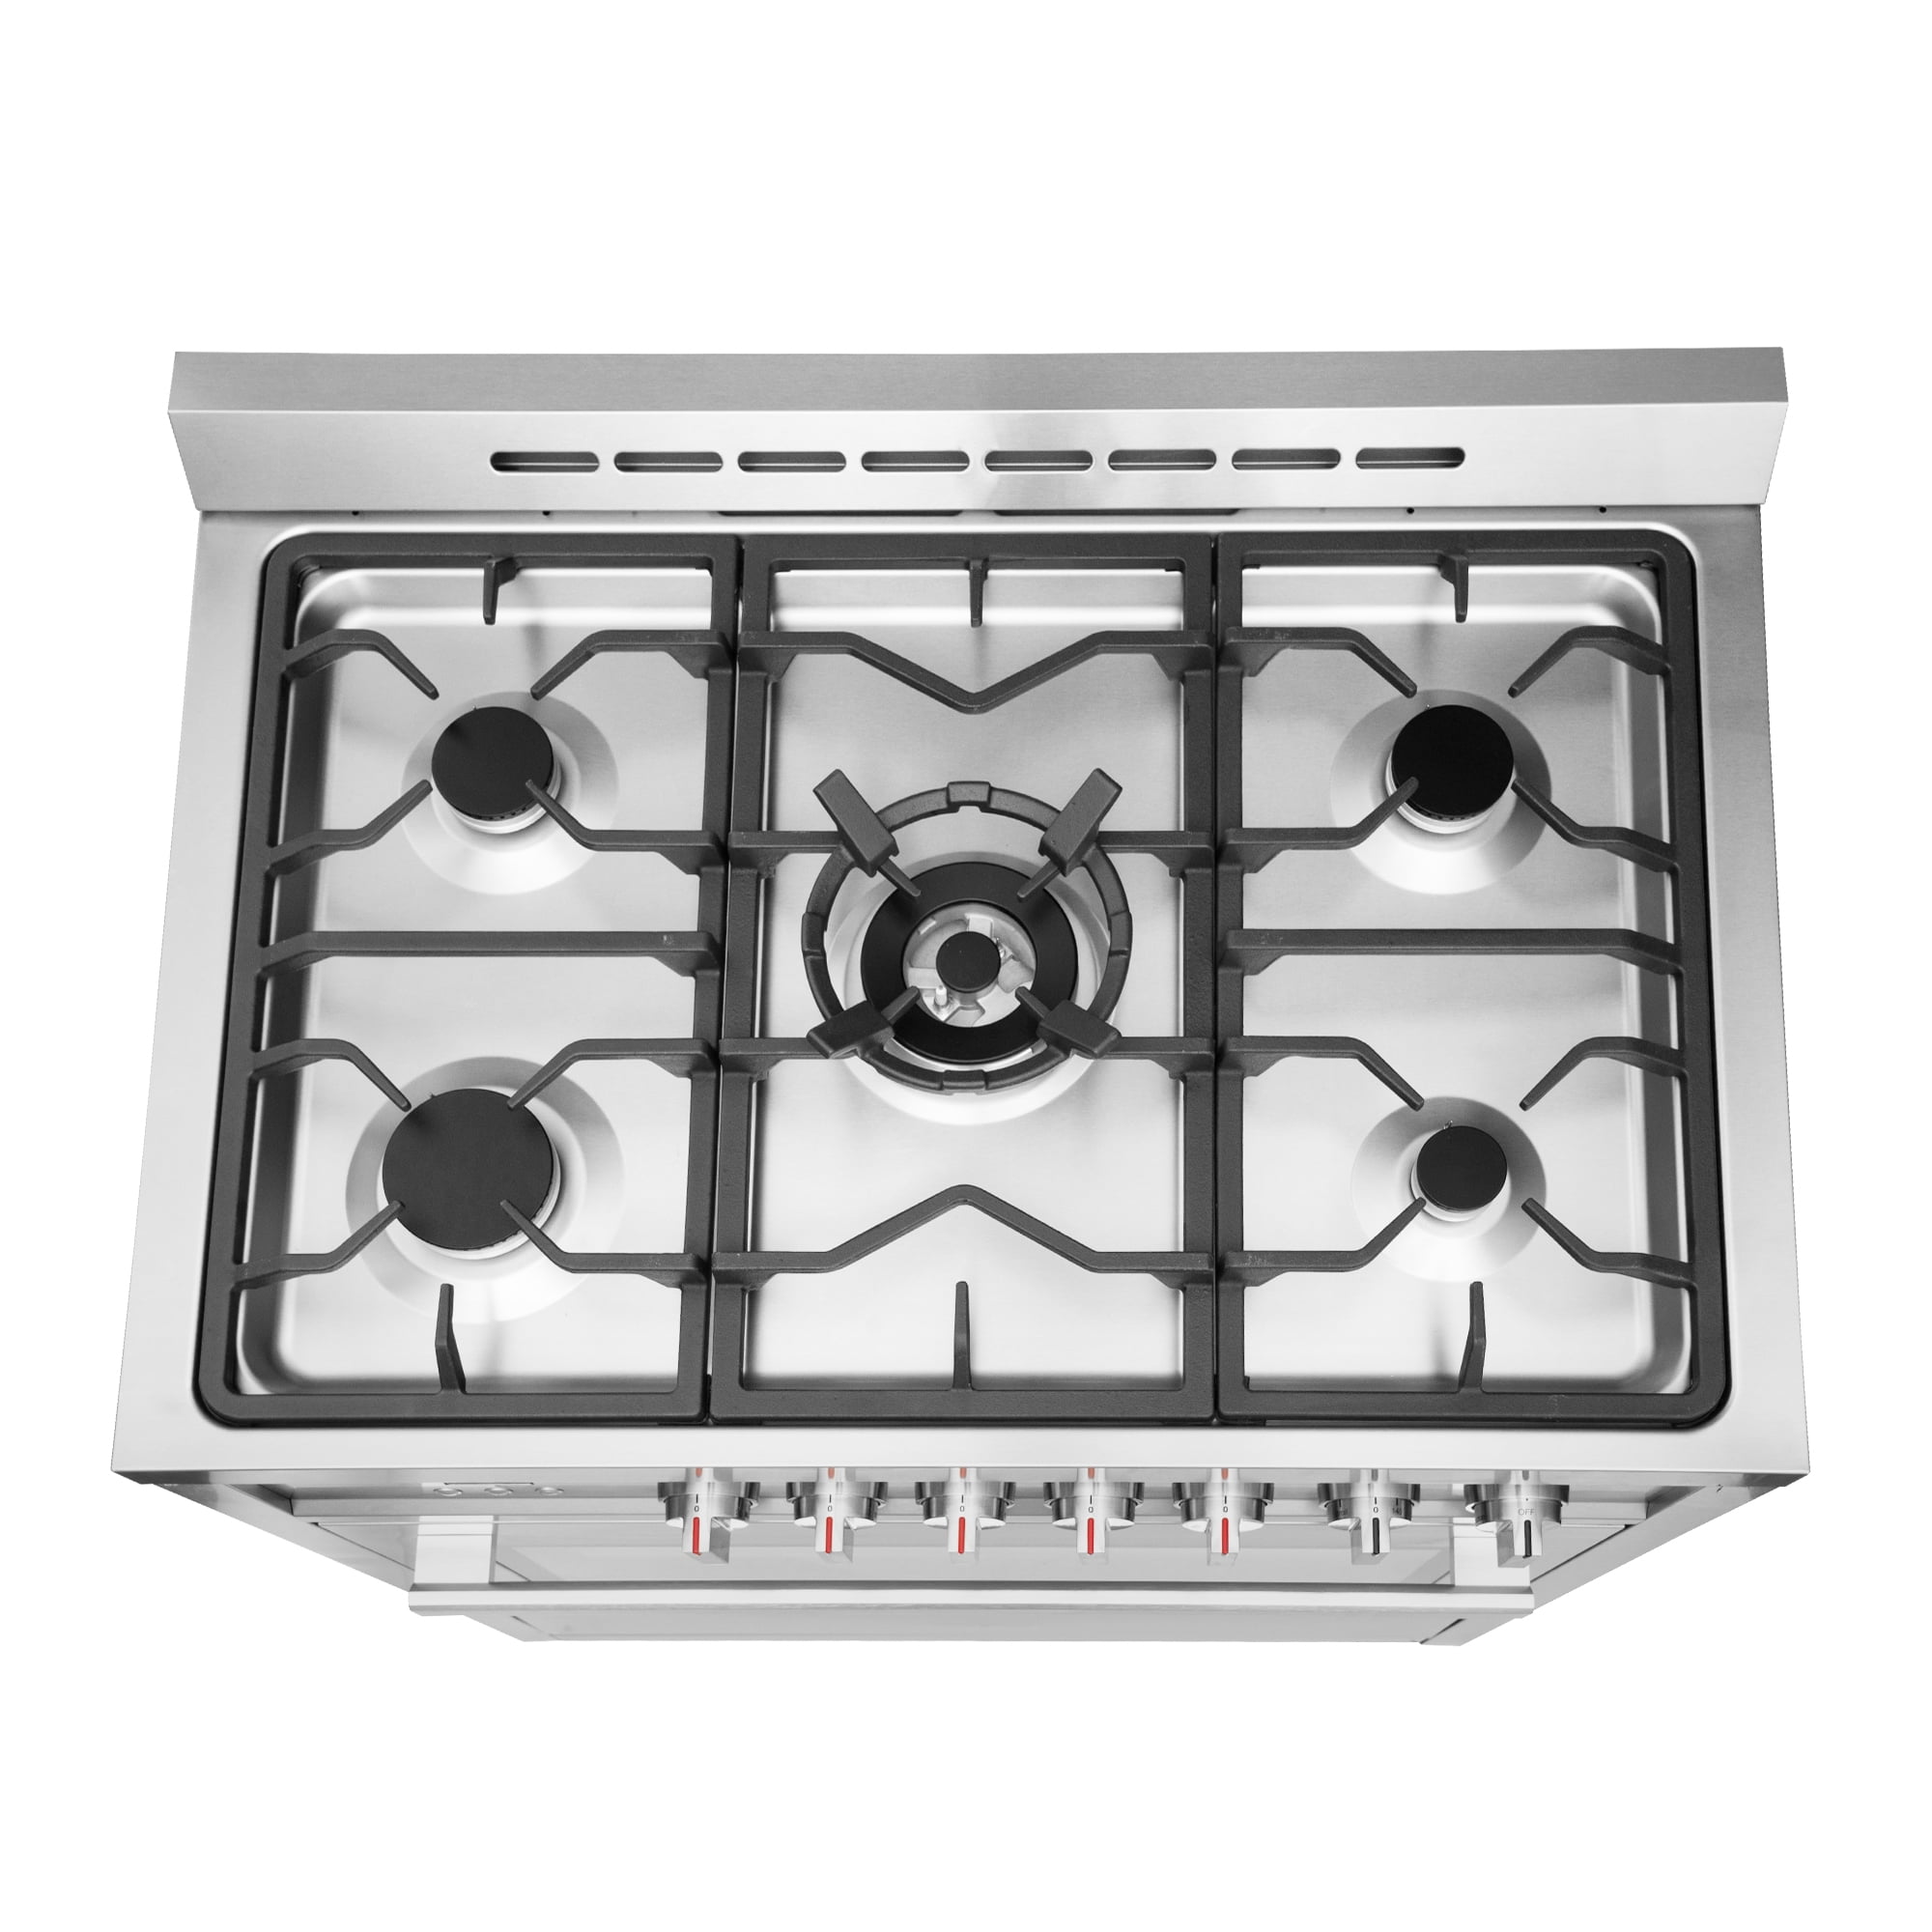 35In Built-In Gas Cooktop 5 Burners LPG/NG Convertible Stainless Steel Gas Stove 